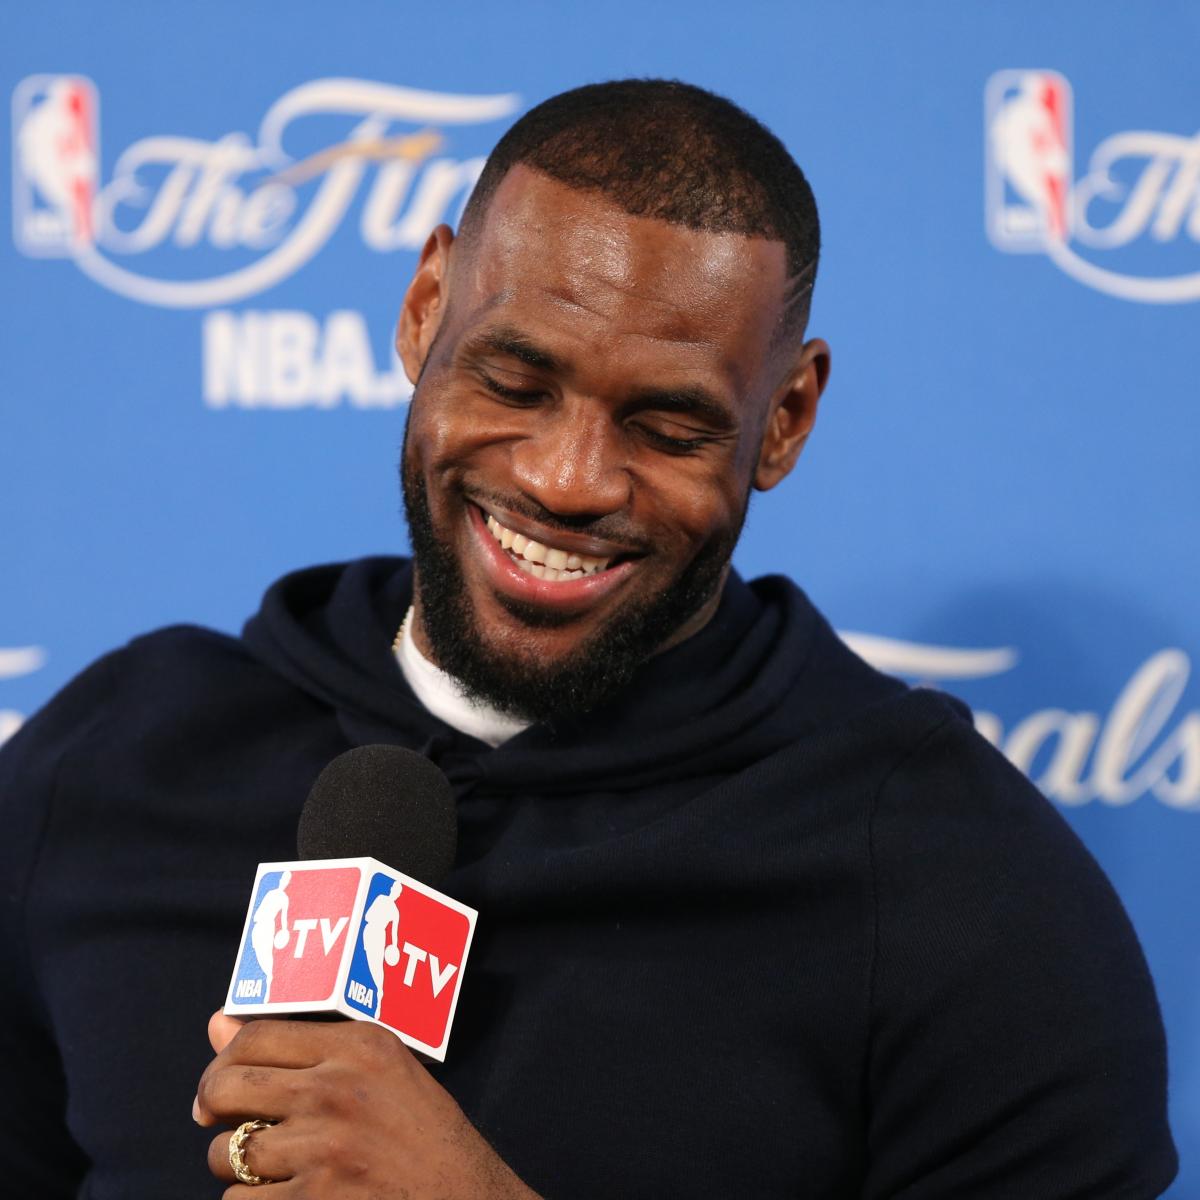 LeBron James' Barber Discusses His Hair, Says It's His 